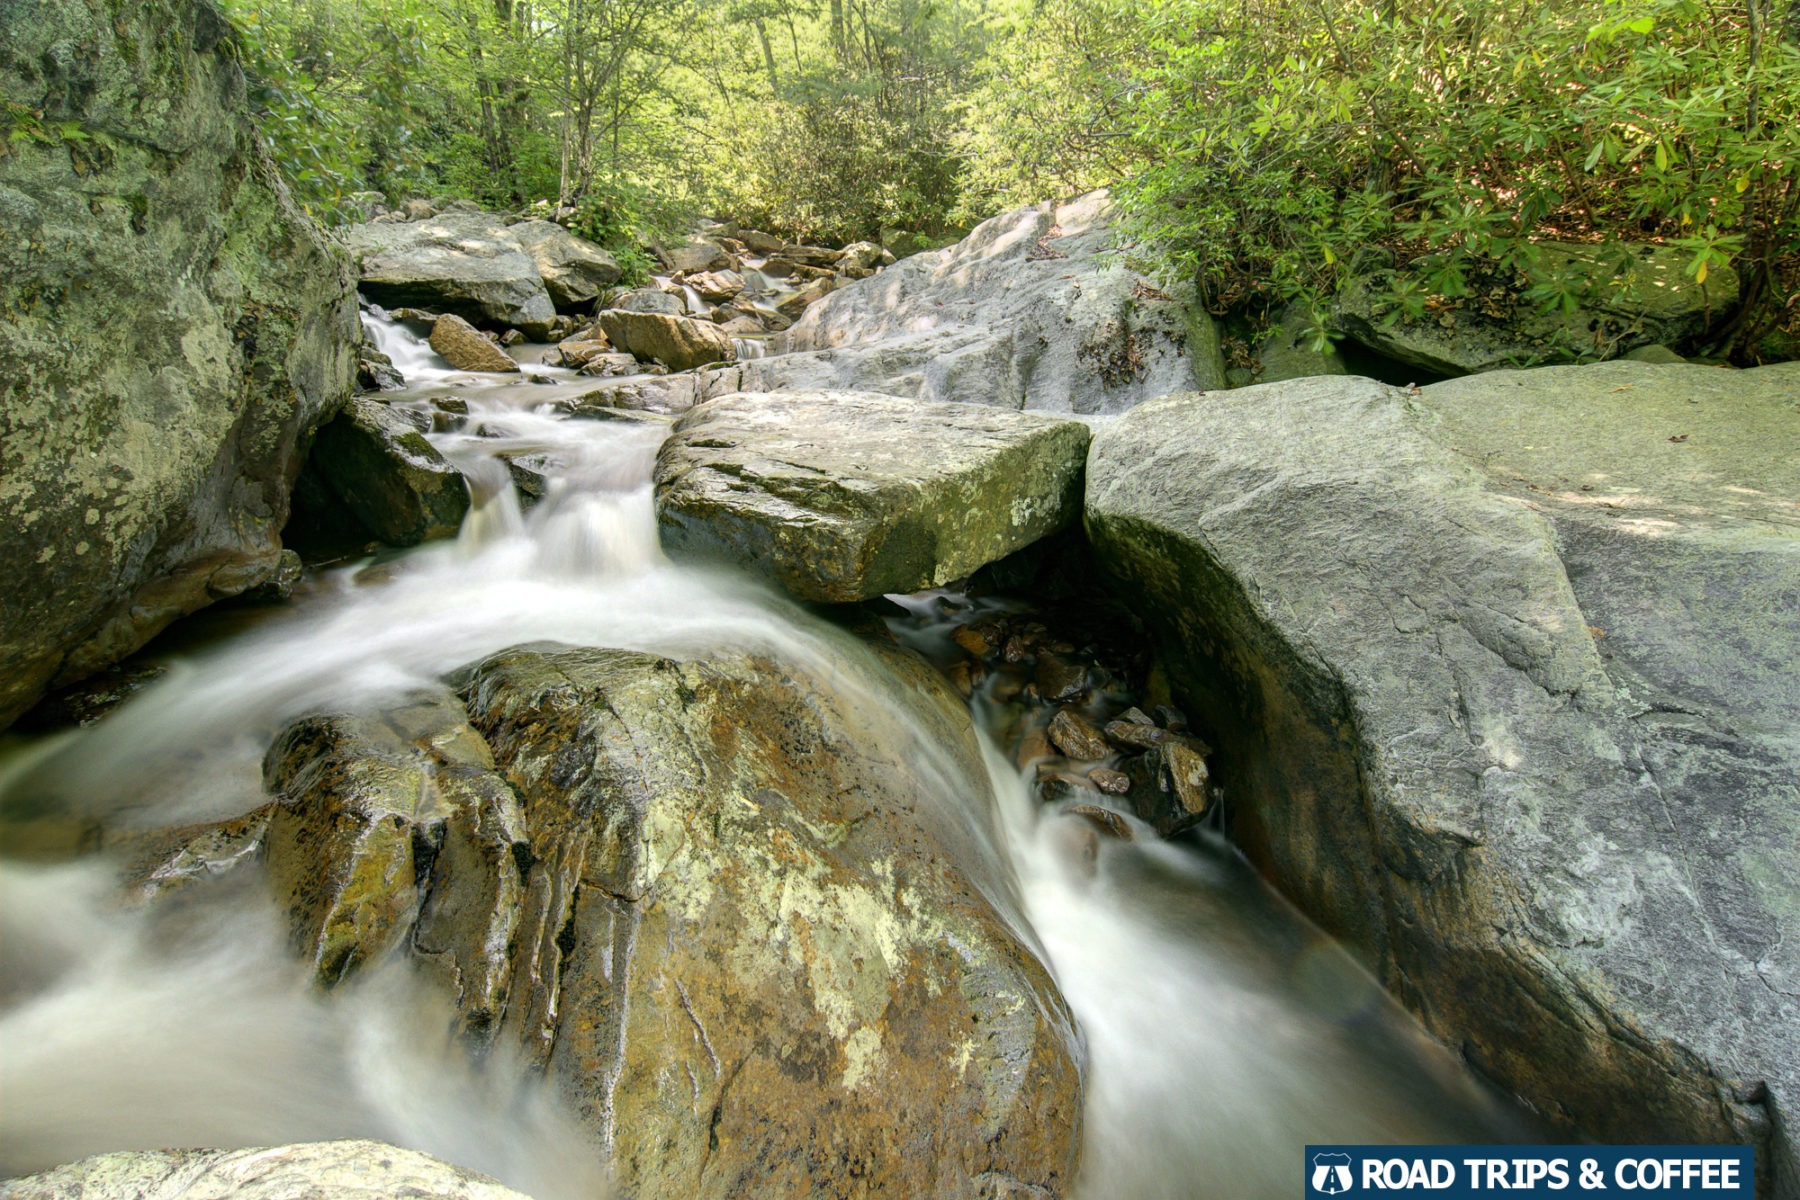 Water rushes across large boulders surrounded by lush trees on the Wilson Creek Trail at Grayson Highlands State Park in Virginia